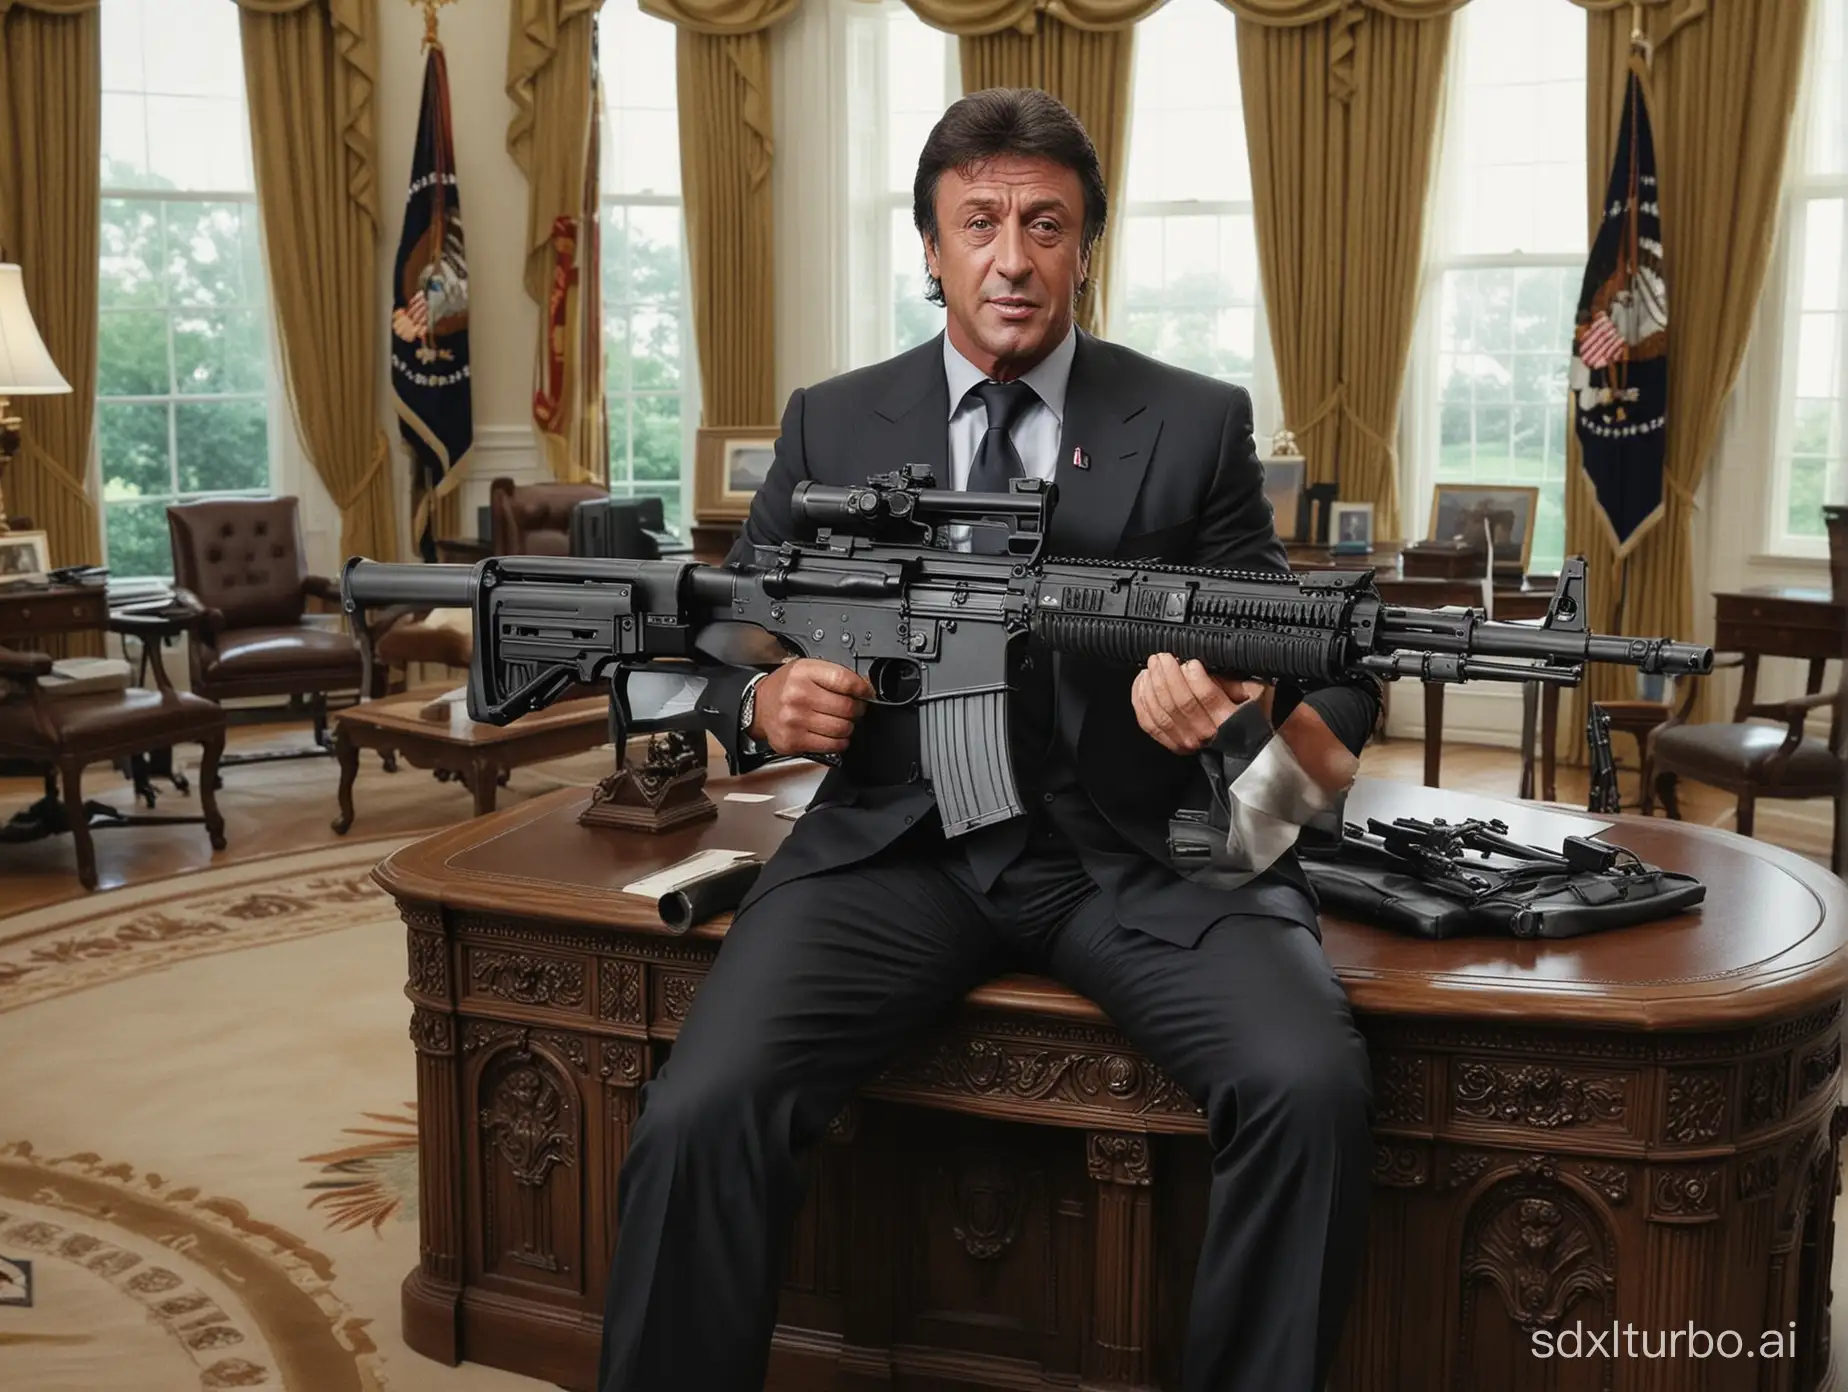 Arnold-Sylvestre-Stallones-Rambo-as-President-Commanding-in-the-Oval-Office-with-a-50-Caliber-Machine-Gun